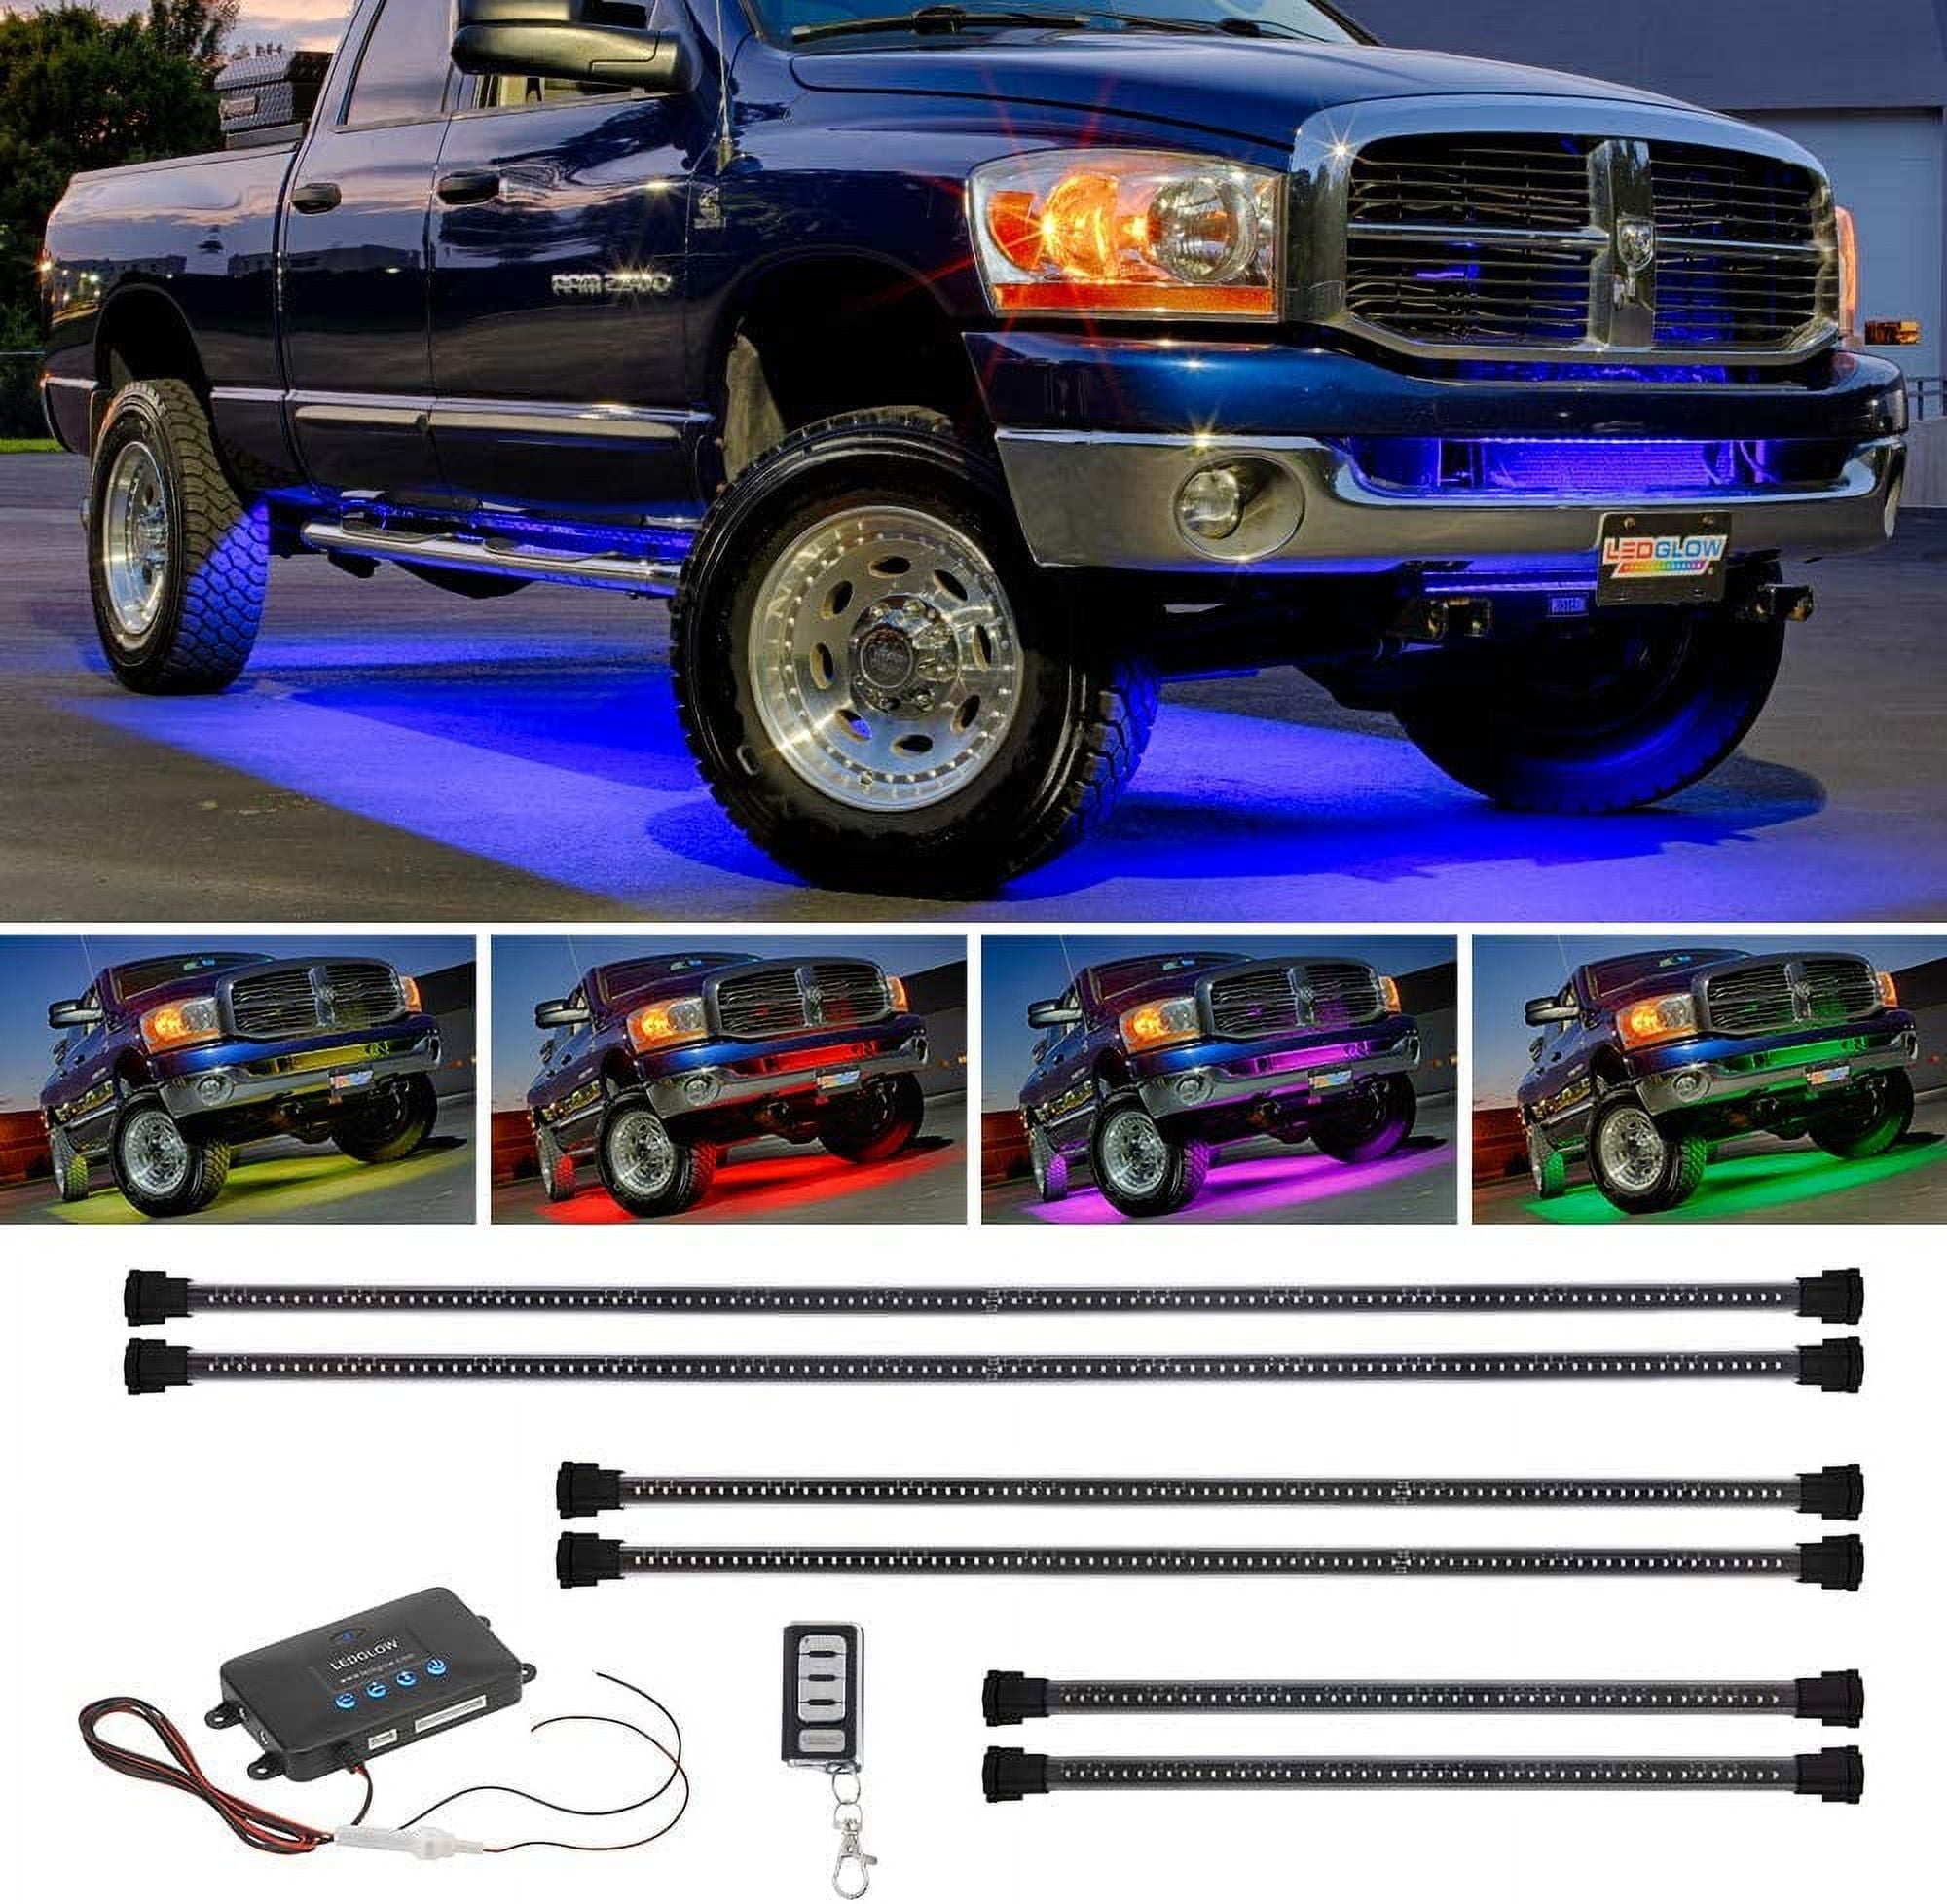 LEDGlow  LED Interior Lights for Cars and Trucks